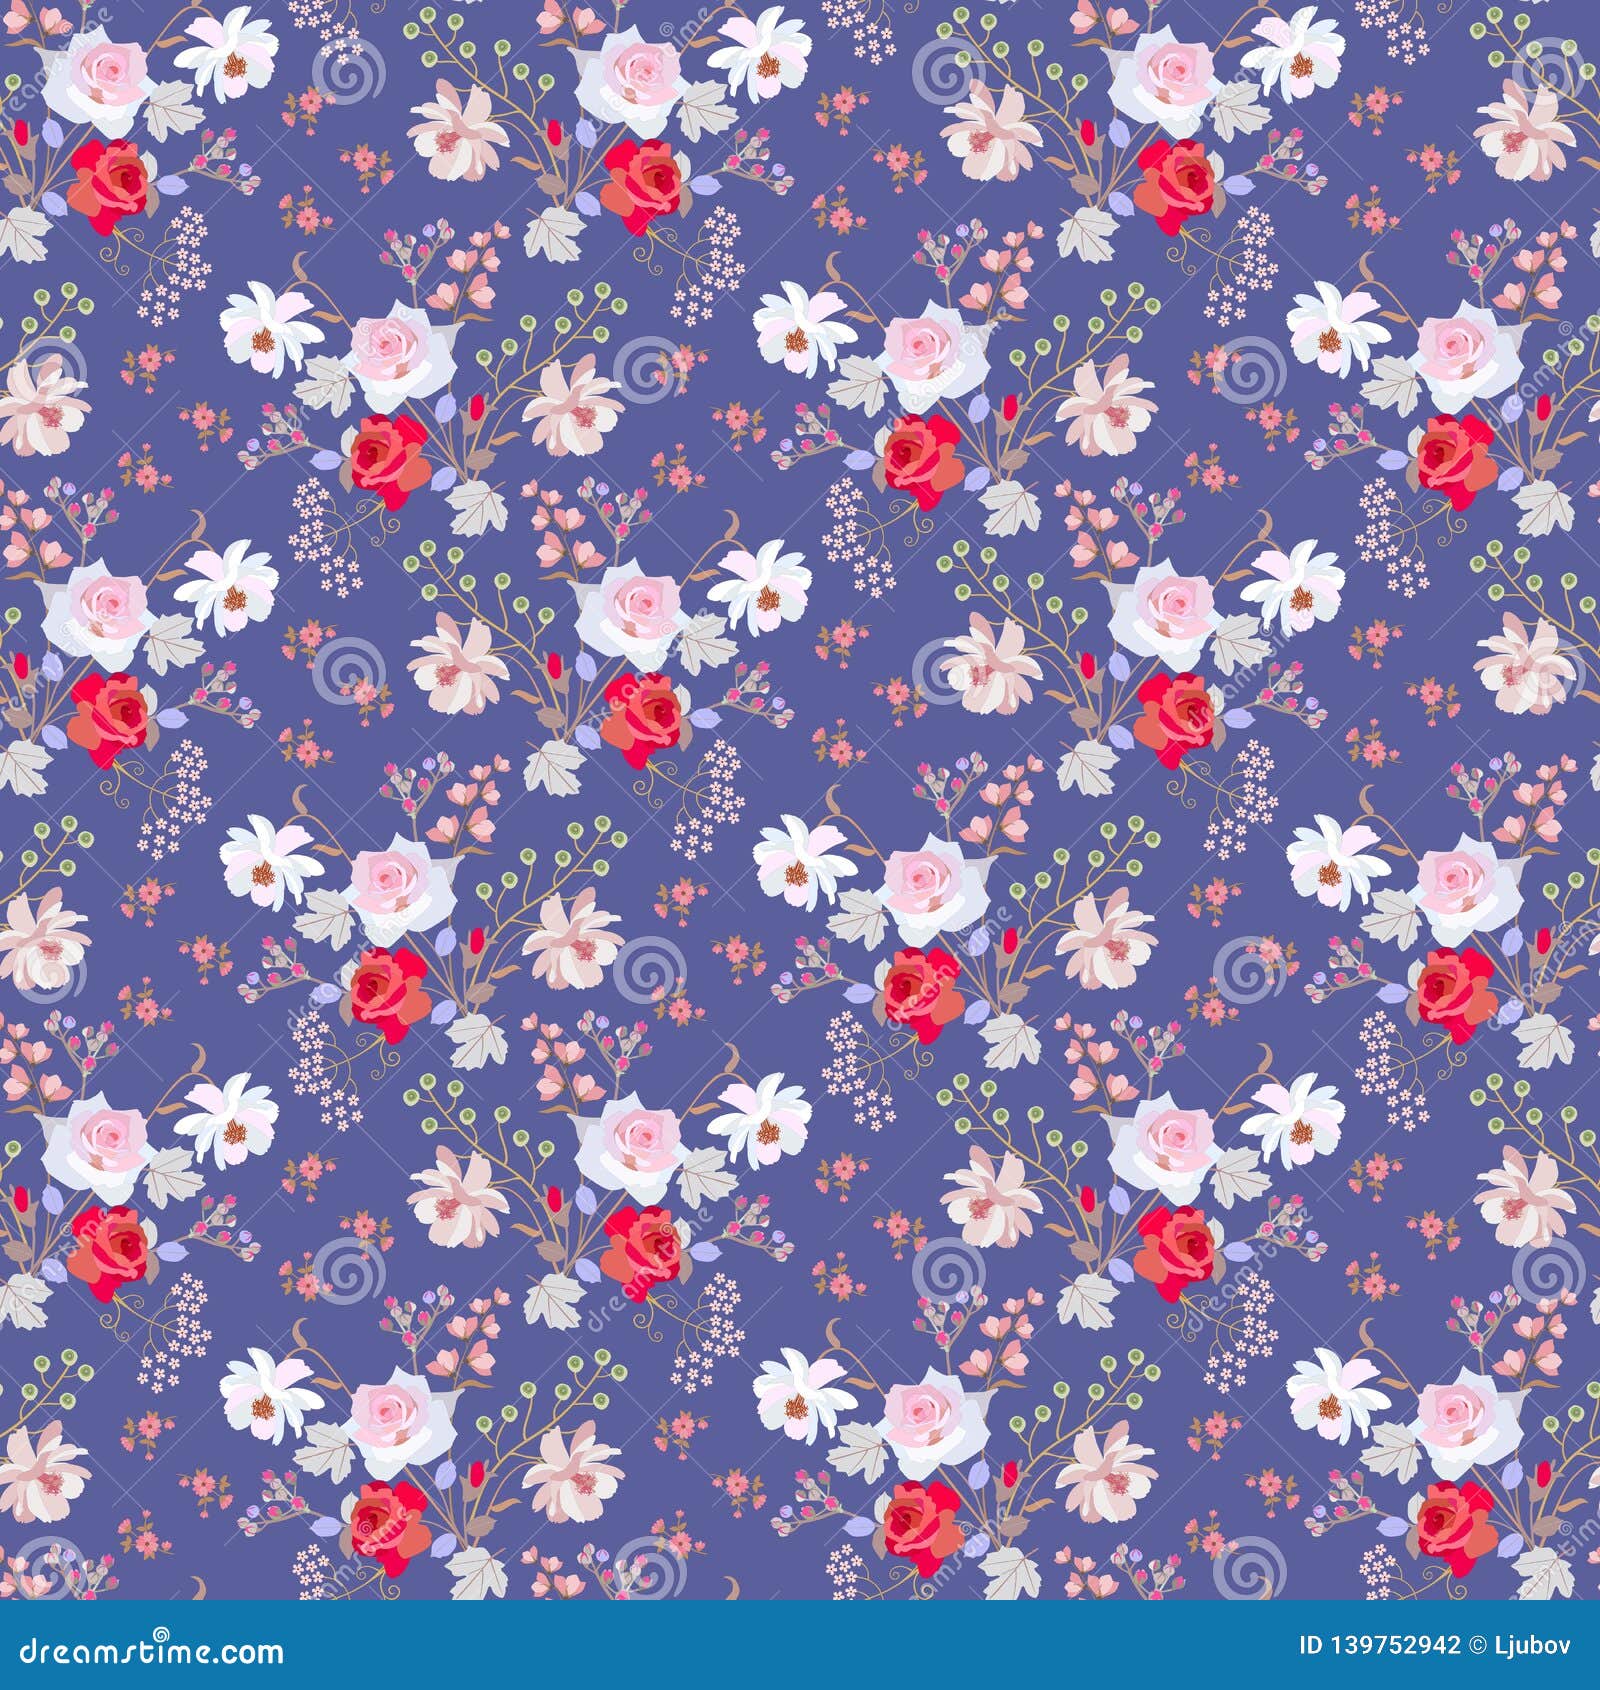 Liberty Floral Like Pattern Downloads / Liberty Find And Download Best ...